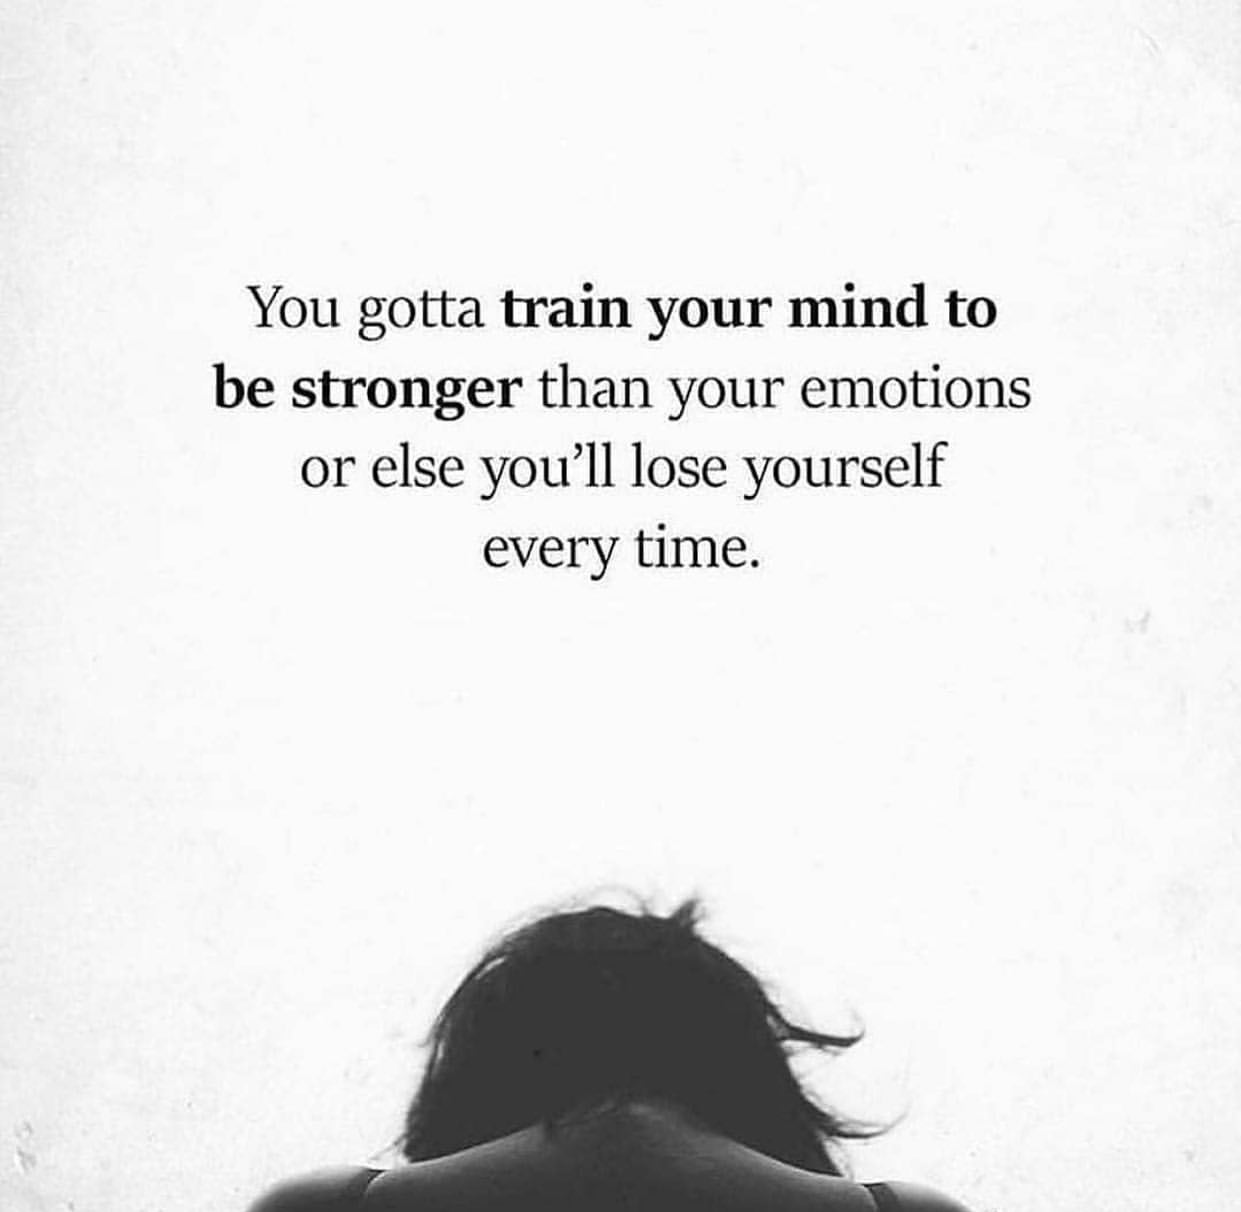 You gotta train your mind to be stronger than your emotions or else you'll lose yourself every time.